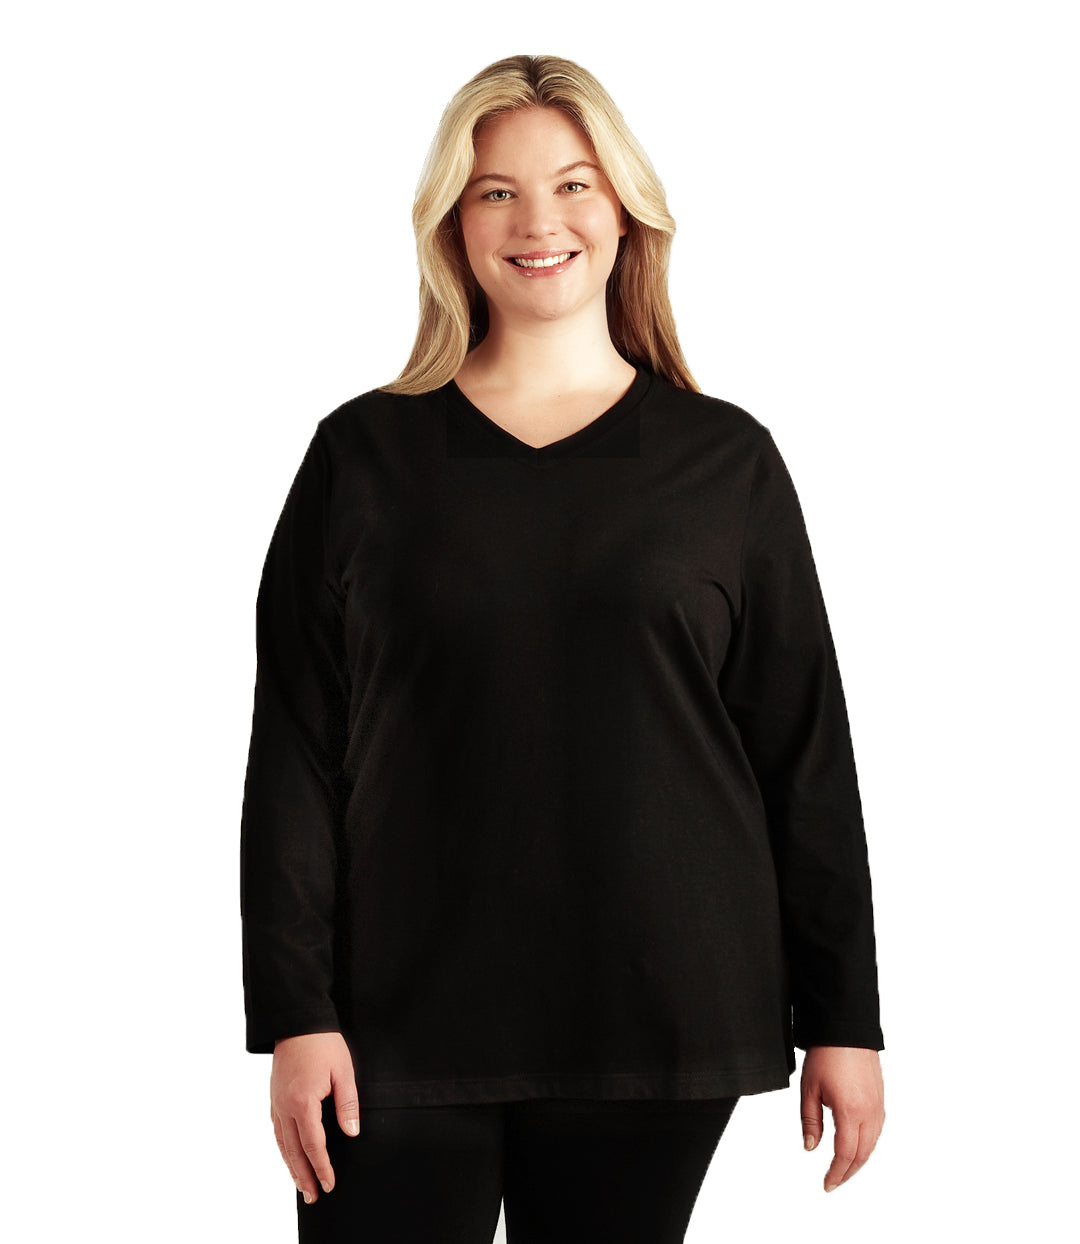 Plus size woman, facing front, wearing JunoActive plus size Stretch Naturals Long Sleeve V-Neck Top in the color Black. She is wearing JunoActive Plus Size Leggings in the color Black.